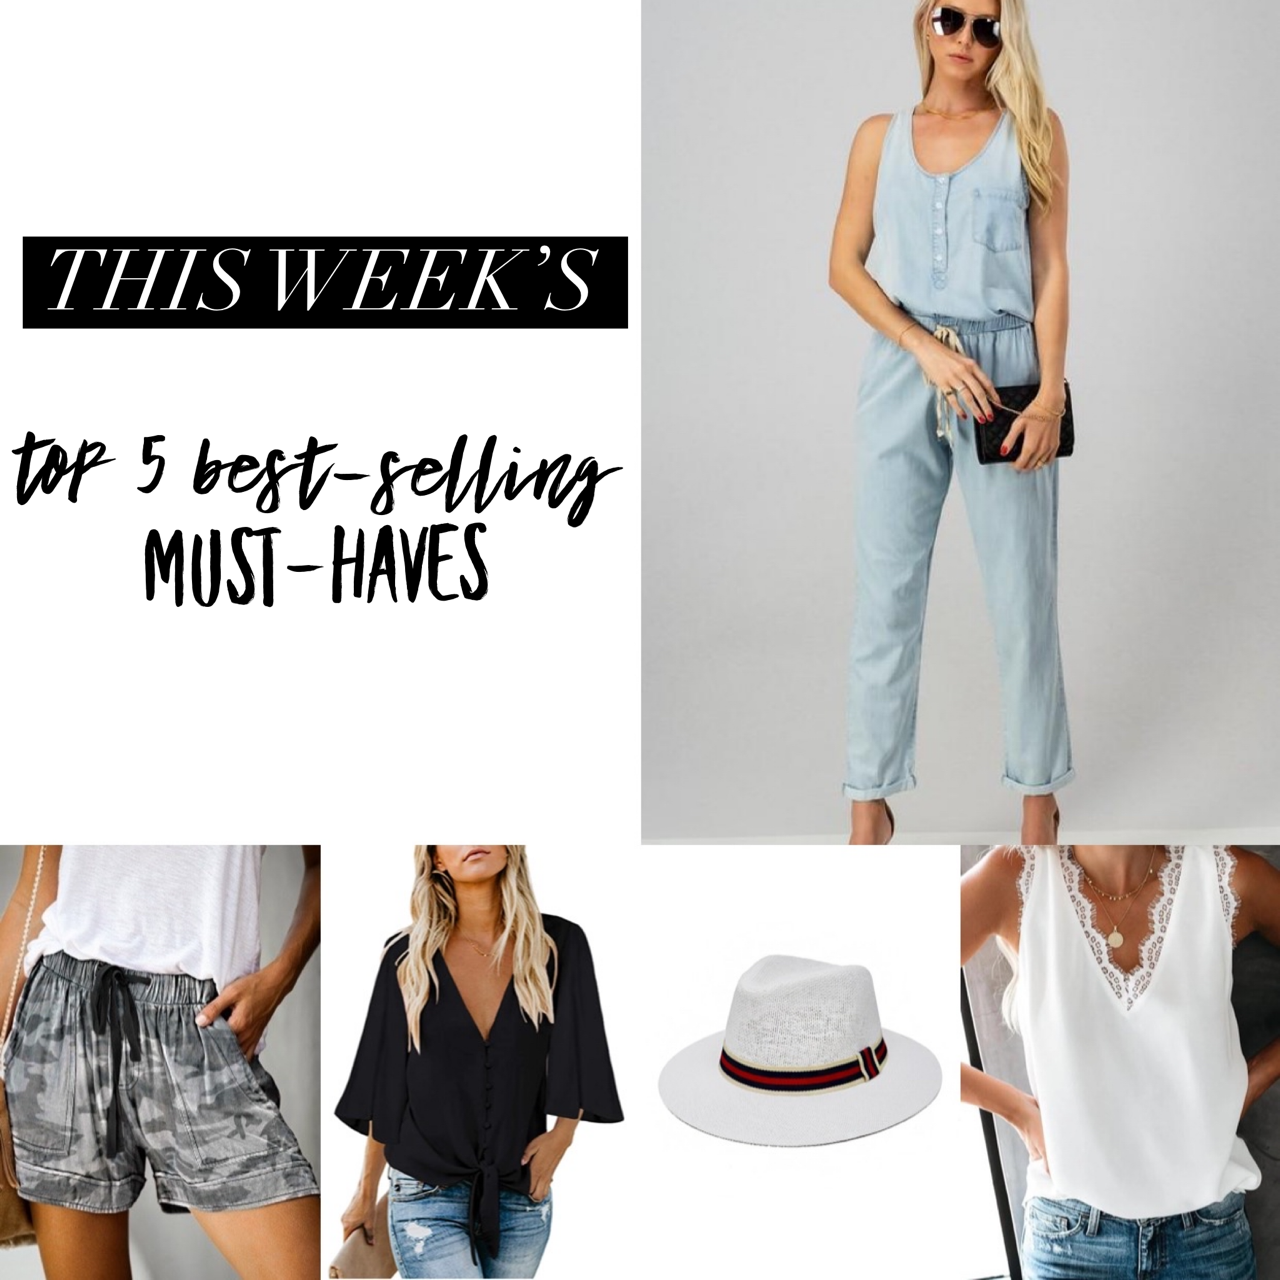 THIS WEEK'S TOP 5 BEST-SELLING MUST-HAVES -  AS DECIDED BY YOU